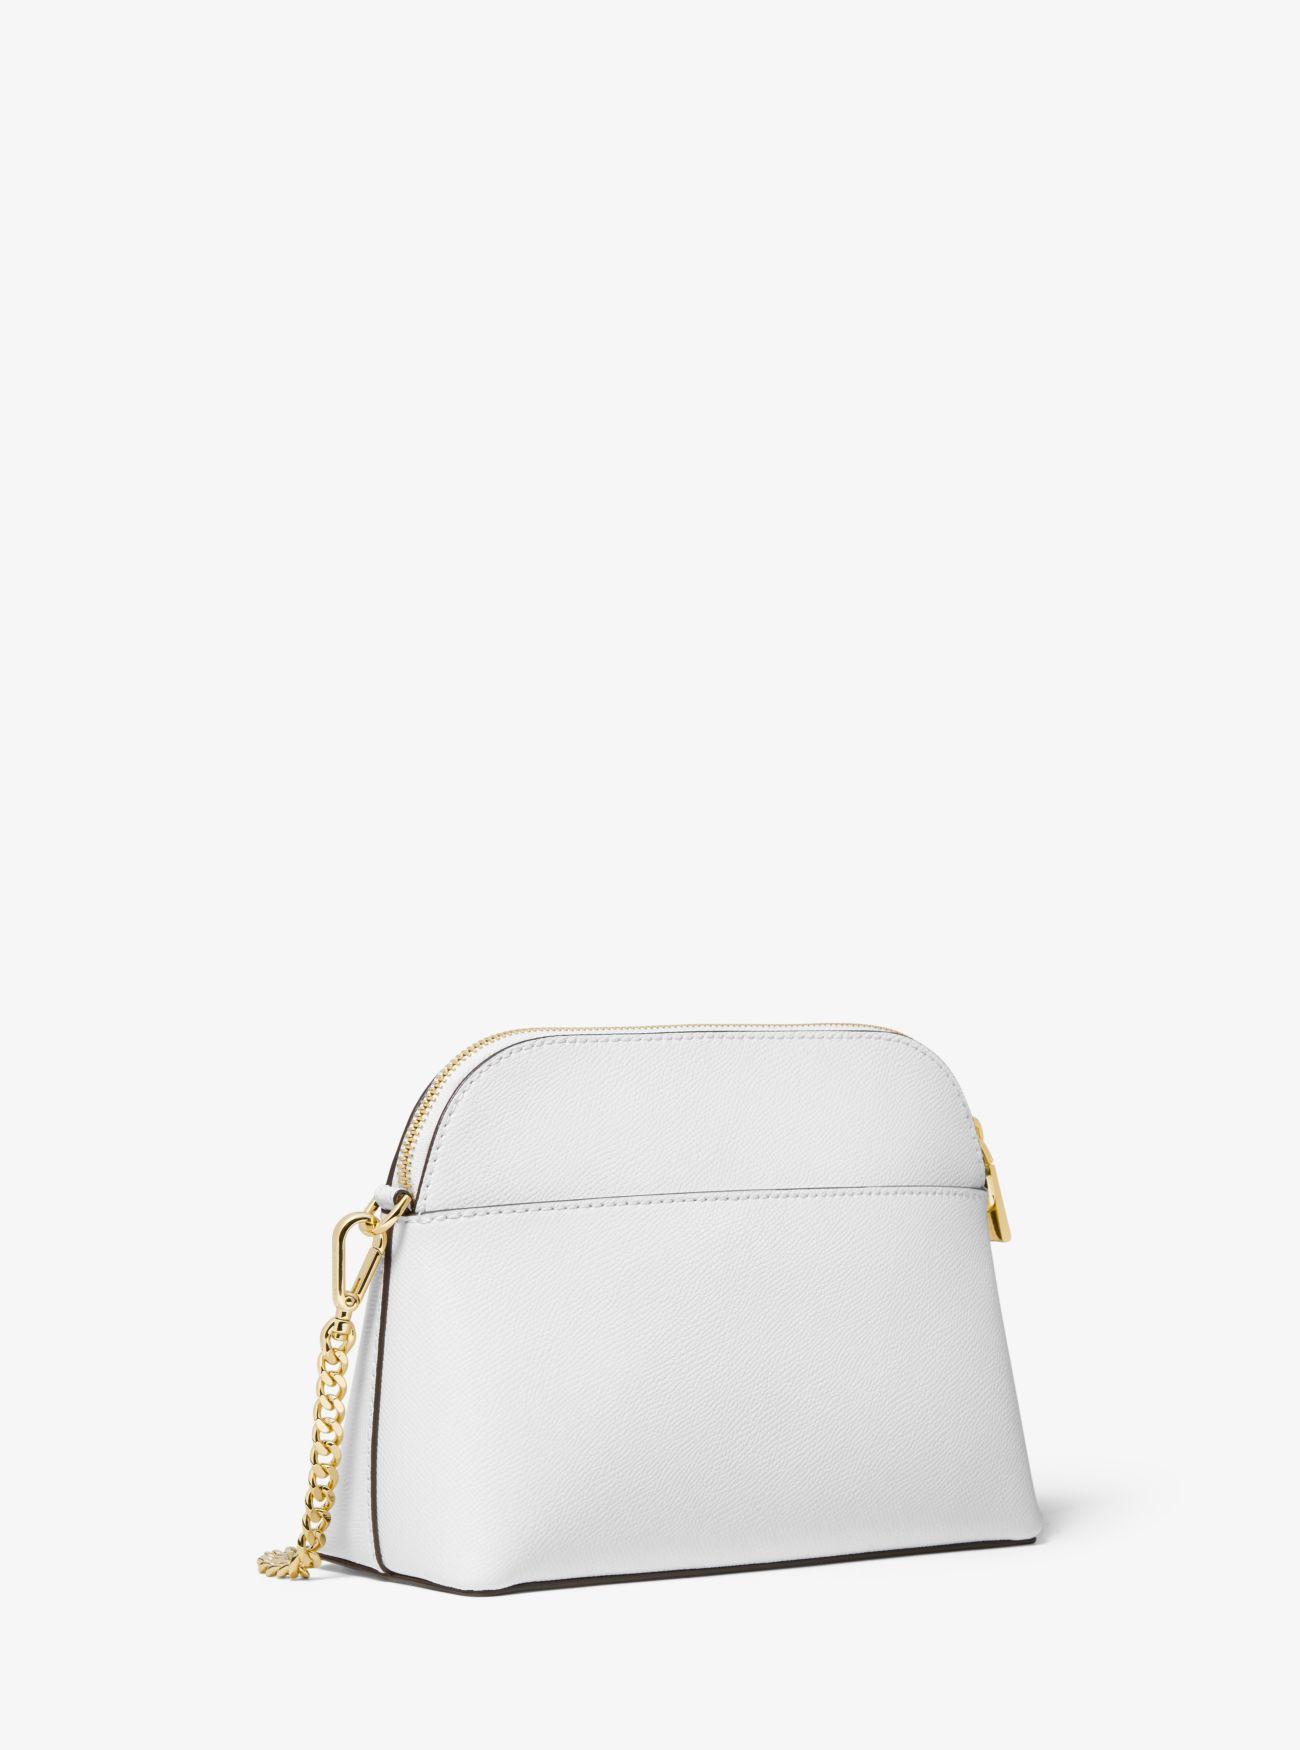 Michael Kors Large Crossgrain Leather Dome Crossbody Bag in White - Lyst